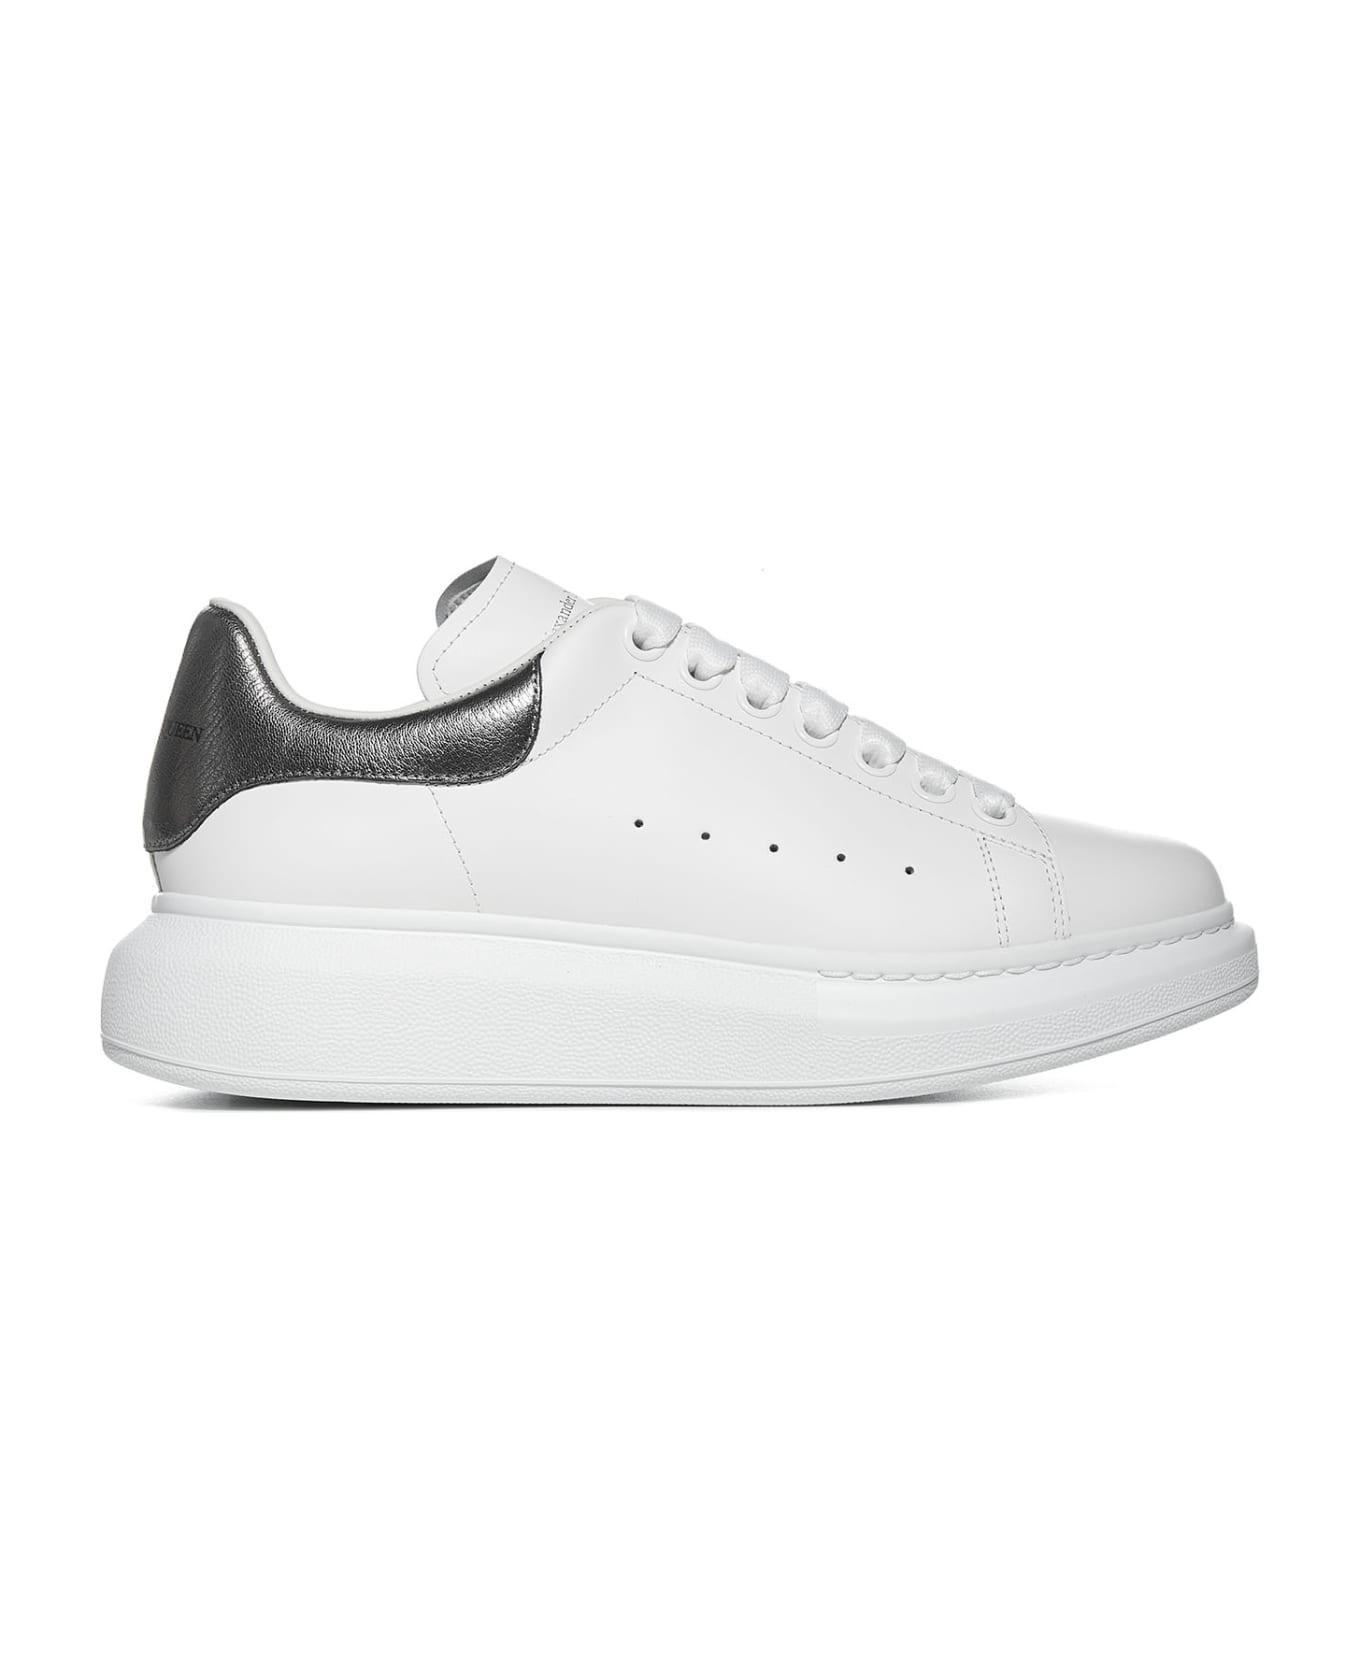 Alexander McQueen Oversized Sneakers In Leather With Contrasting Heel Tab - White/blk Pearl